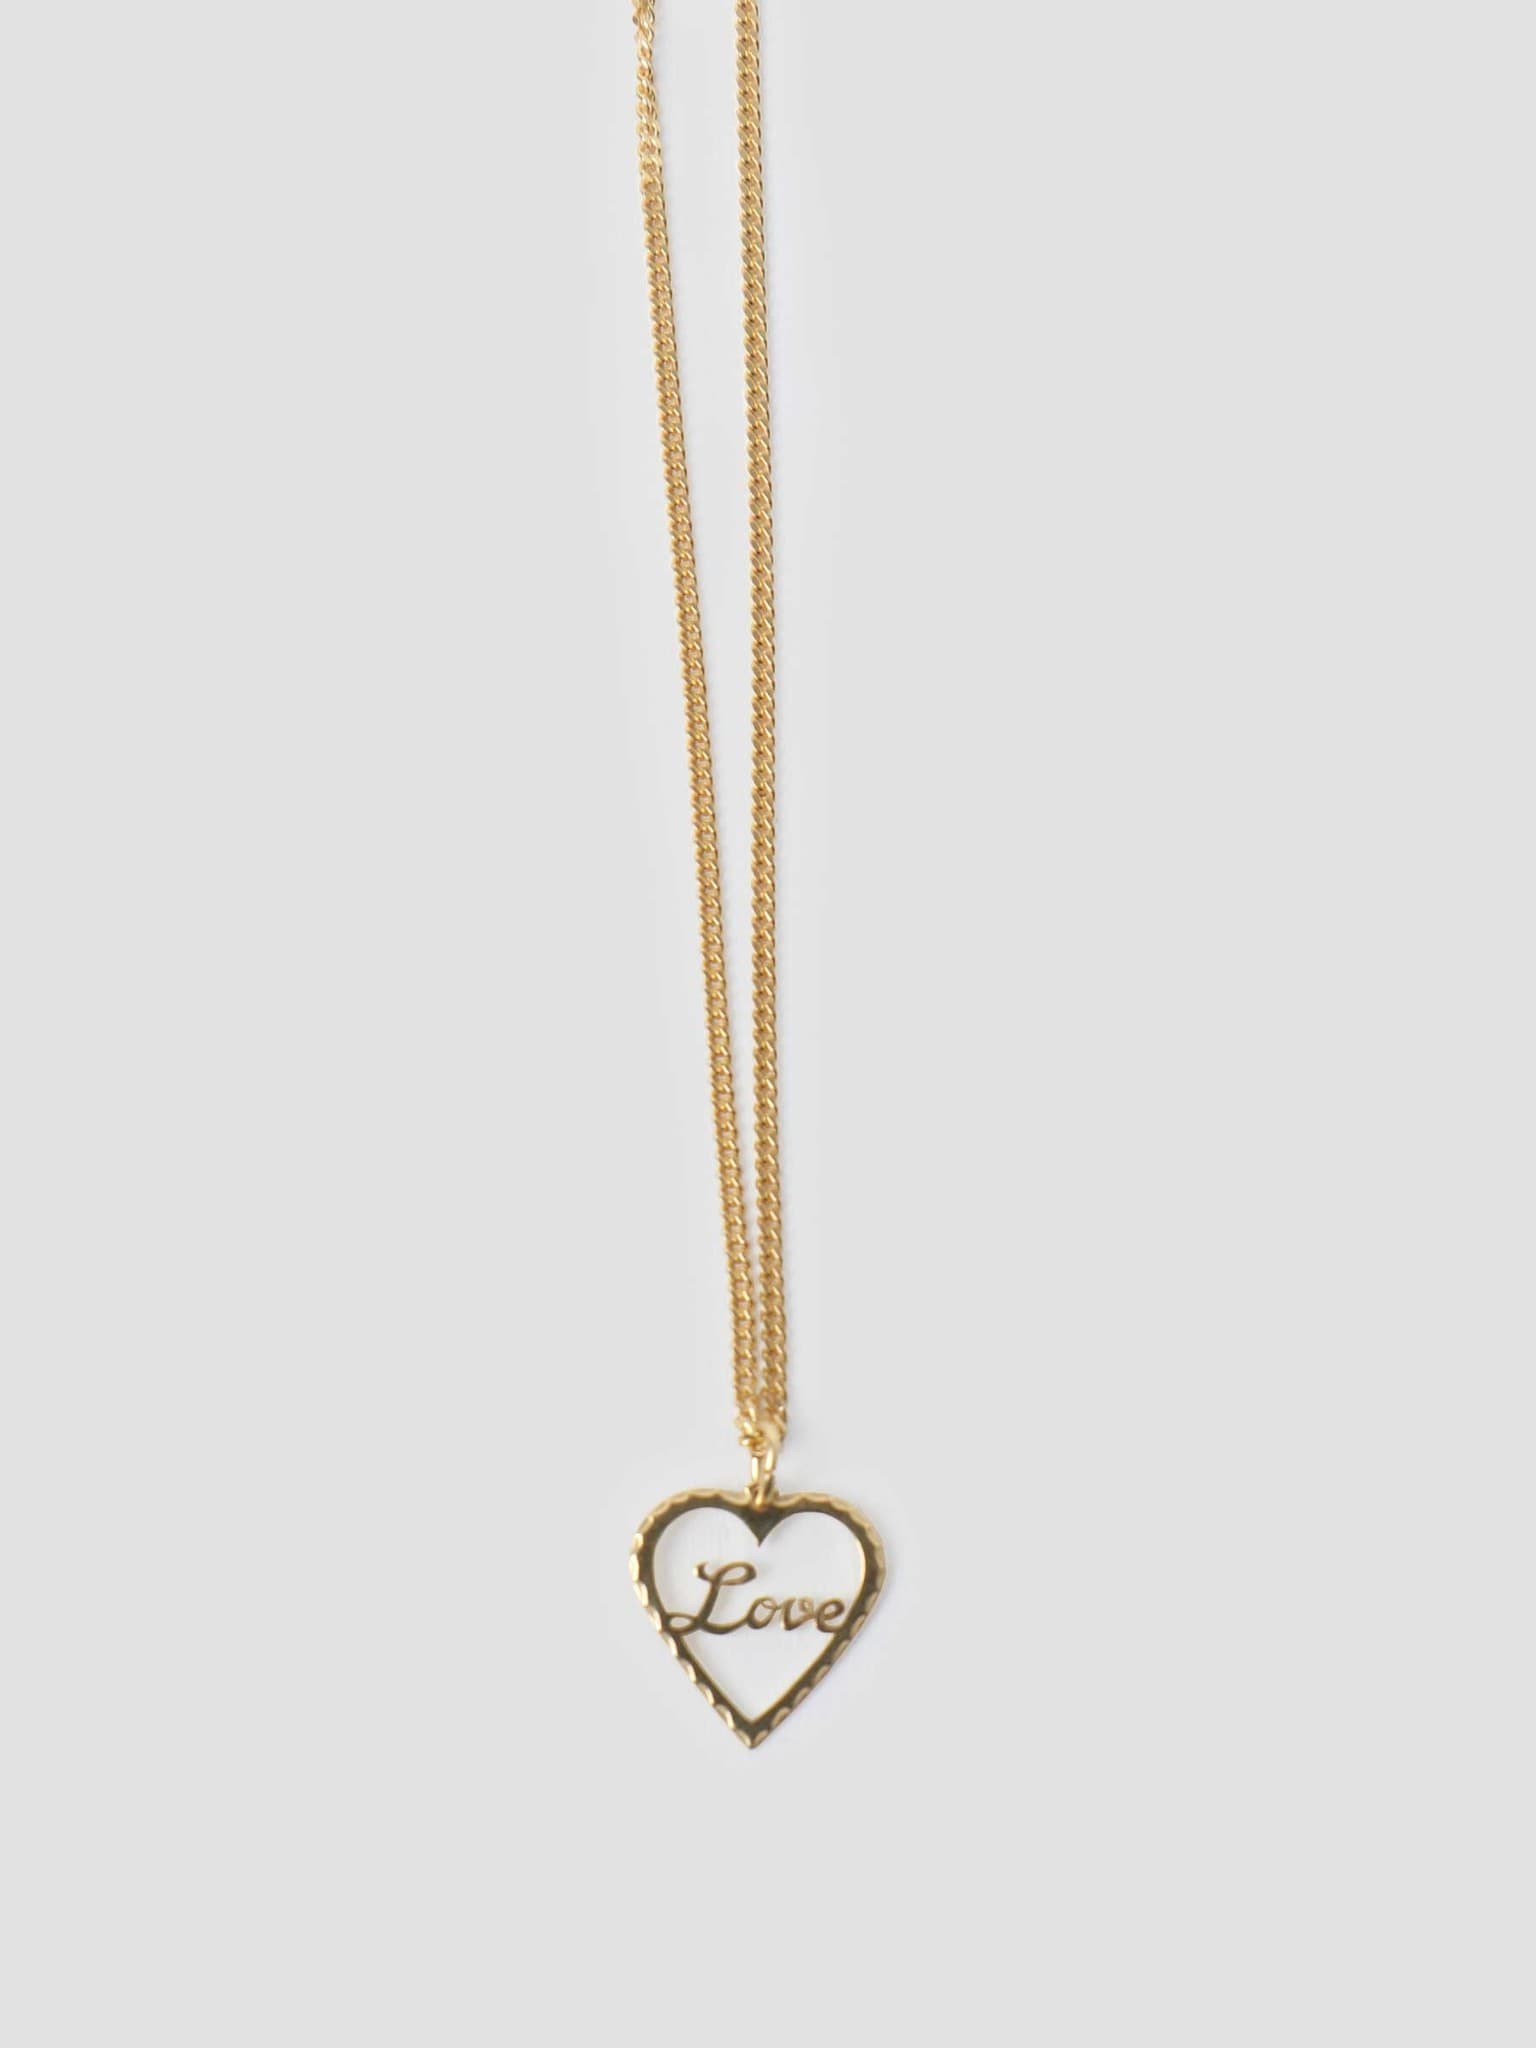 by Freshcotton Love Necklace 55cm 14K Gold Plated